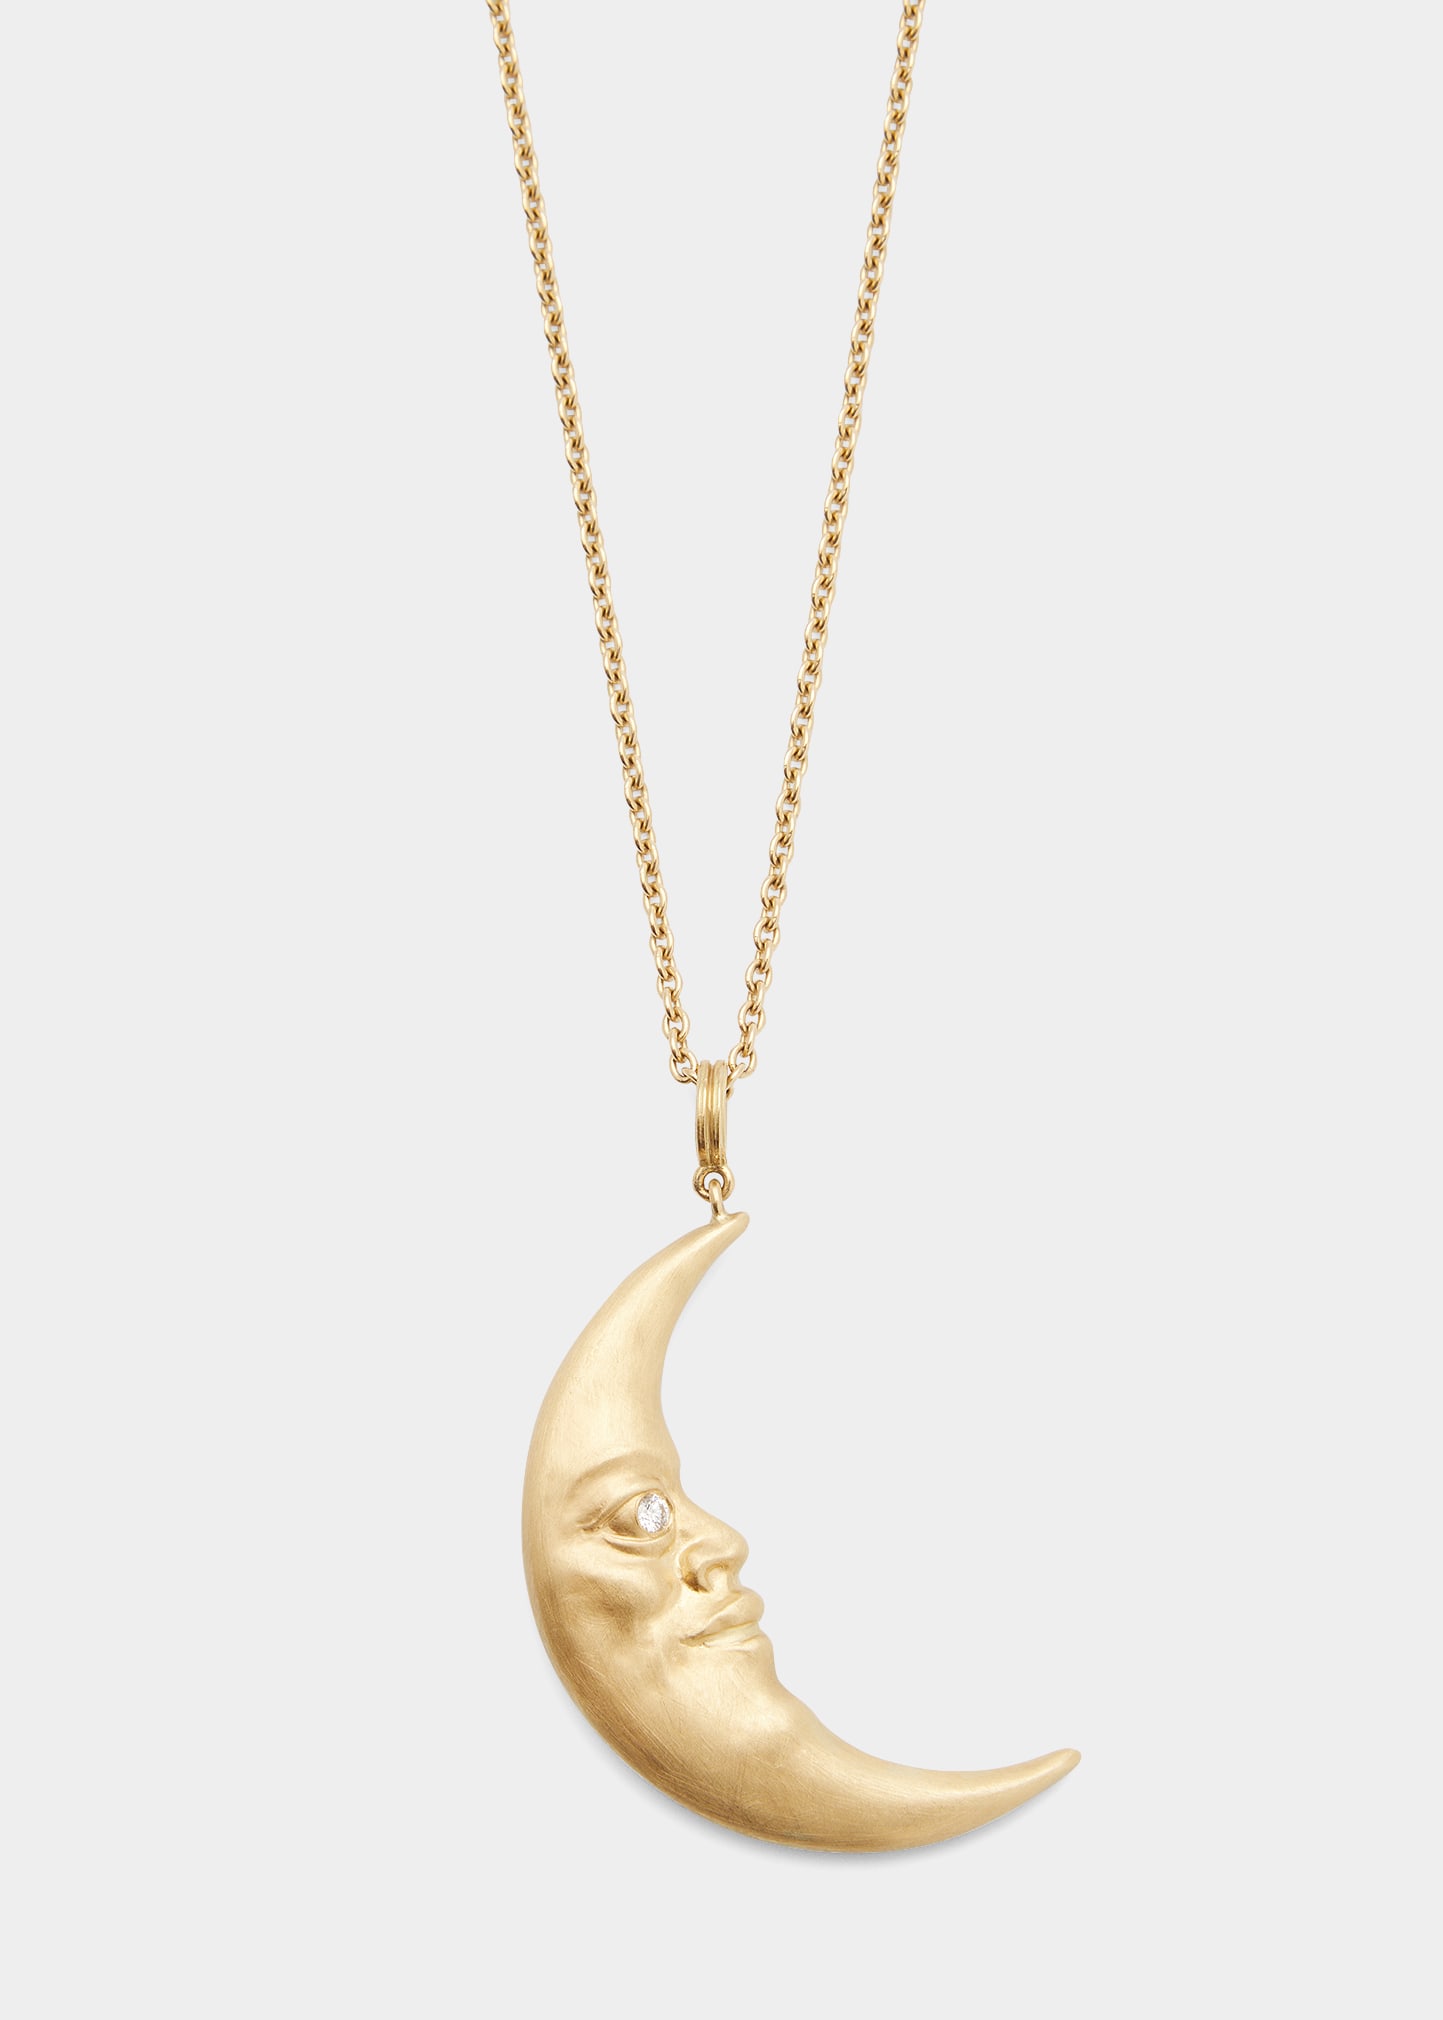 Large Crescent Moon Face Pendant in 18k Gold and Diamonds